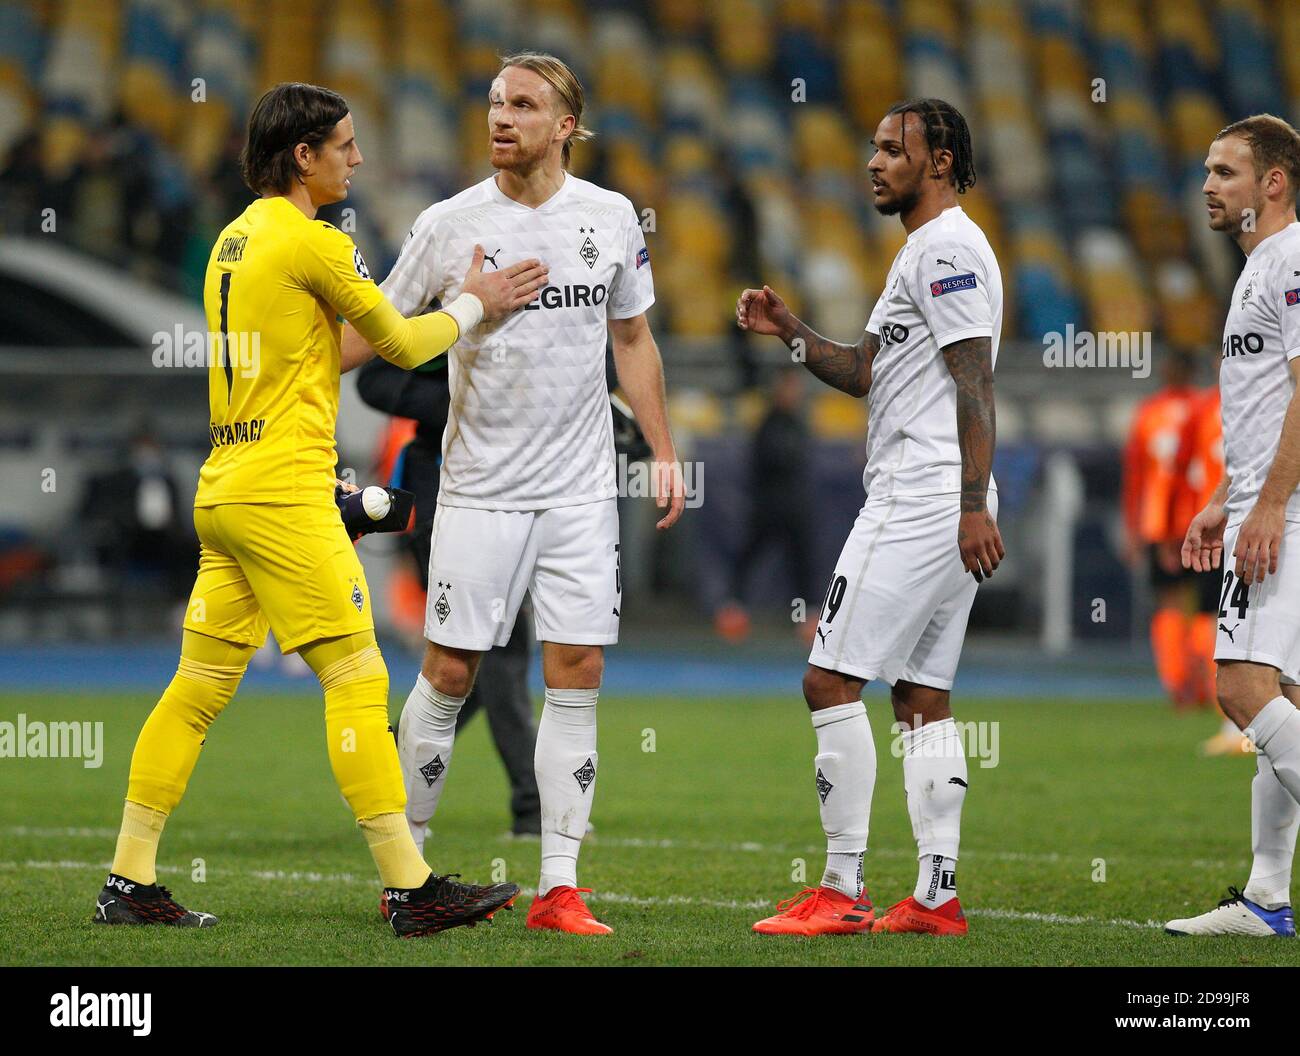 Players of Borussia Monchengladbach congratulate each other after the the UEFA Champions League group B football match between Shakhtar Donetsk and Borussia Monchengladbach at the Olimpiyskiy stadium.(Final score: Shakhtar Donetsk  0-6 borussia mönchengladbach) Stock Photo